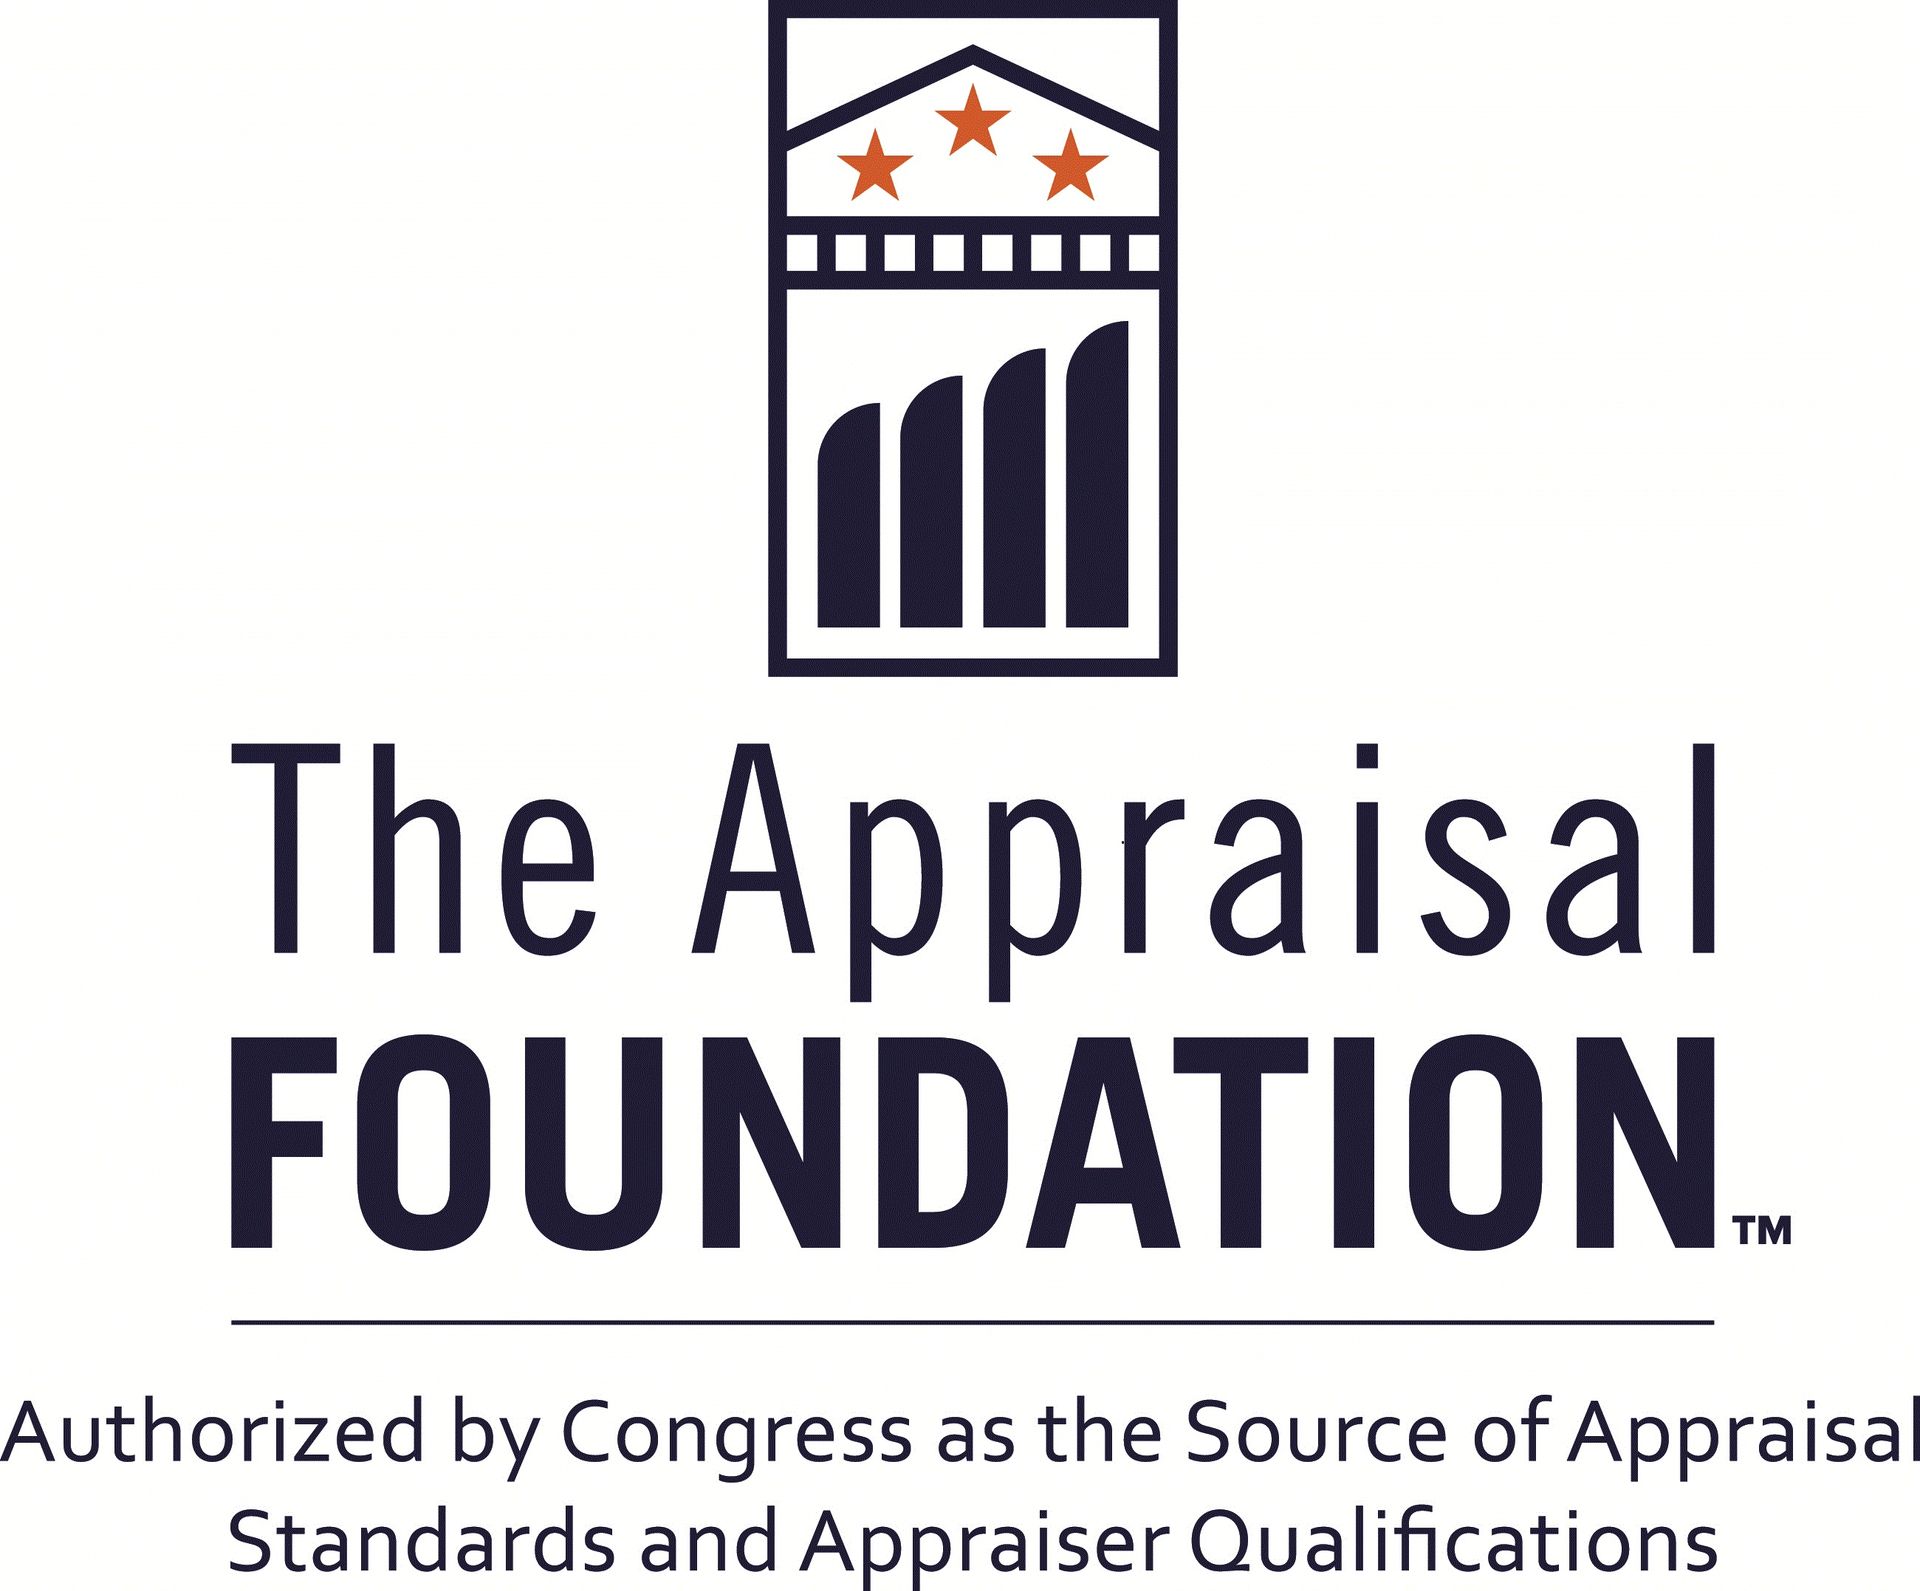 The logo for the appraisal foundation is authorized by congress as the source of appraisal standards and appraiser qualifications.